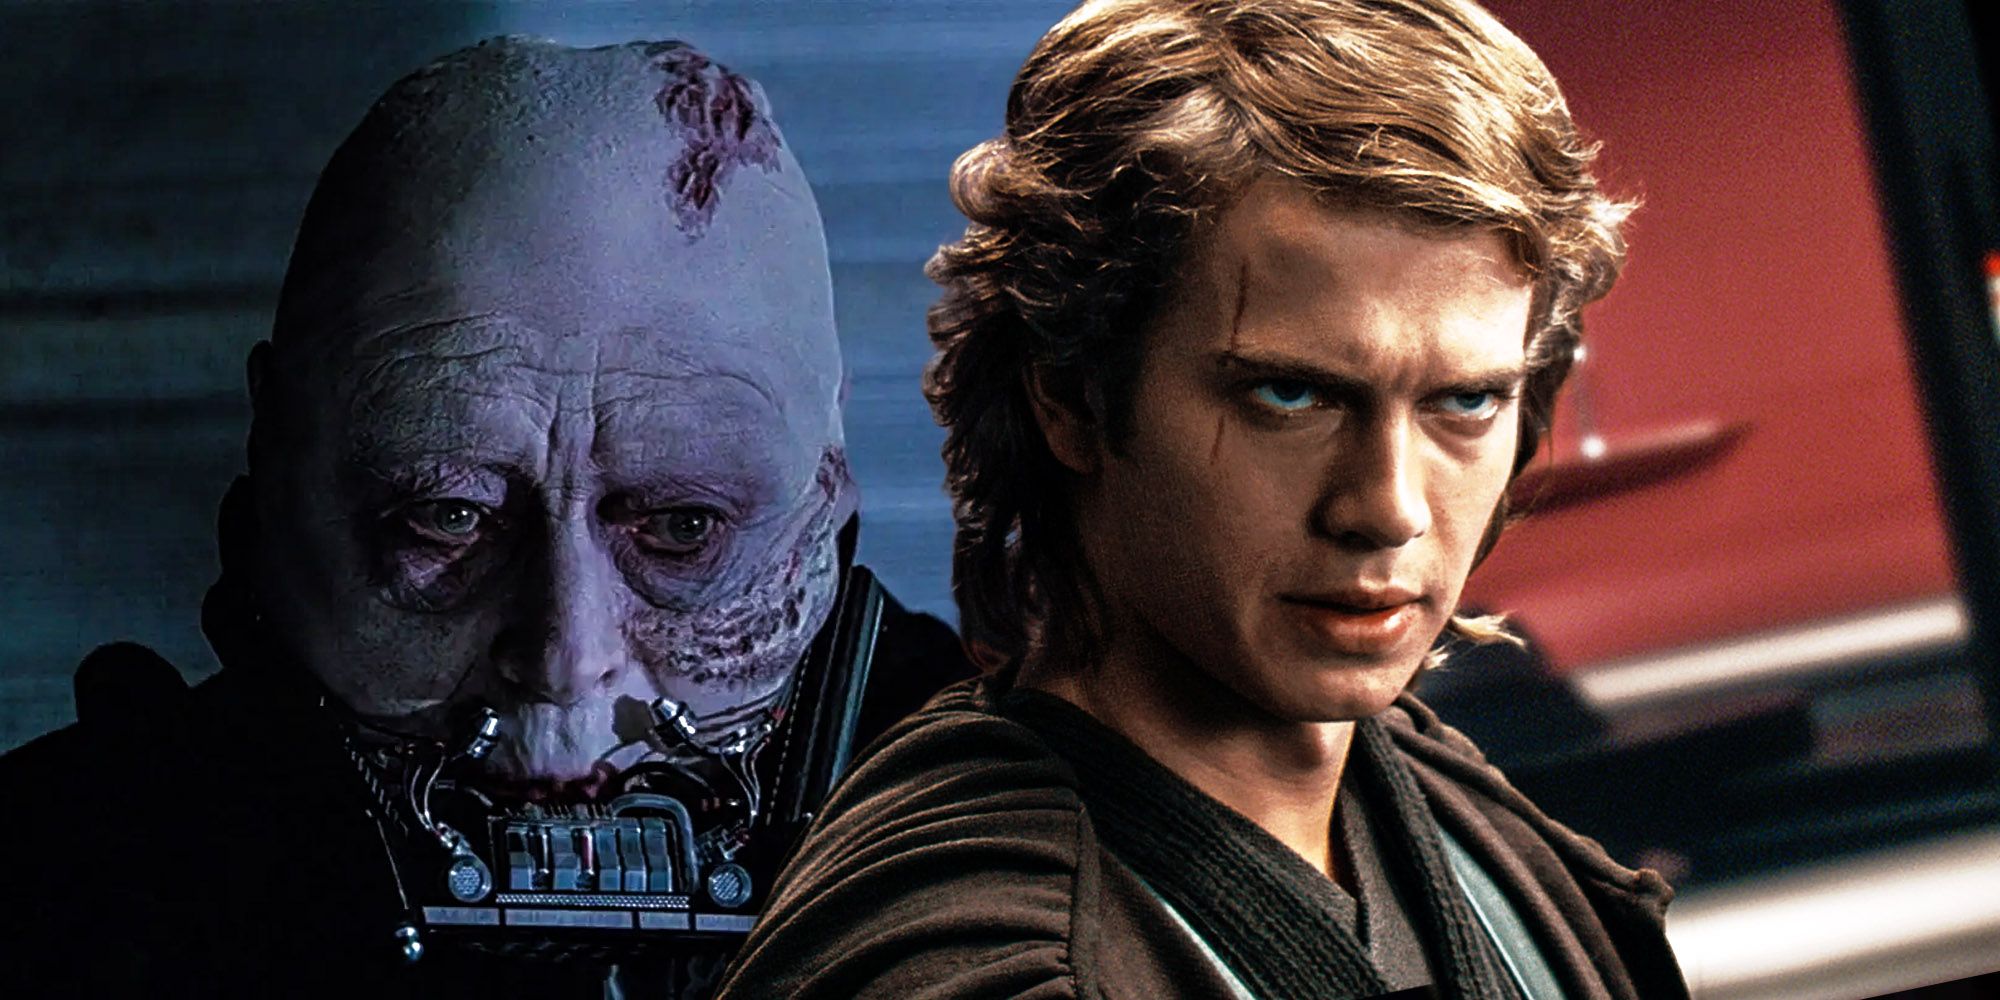 Anakin Skywalker in Revenge of the Sith and Return of the Jedi.